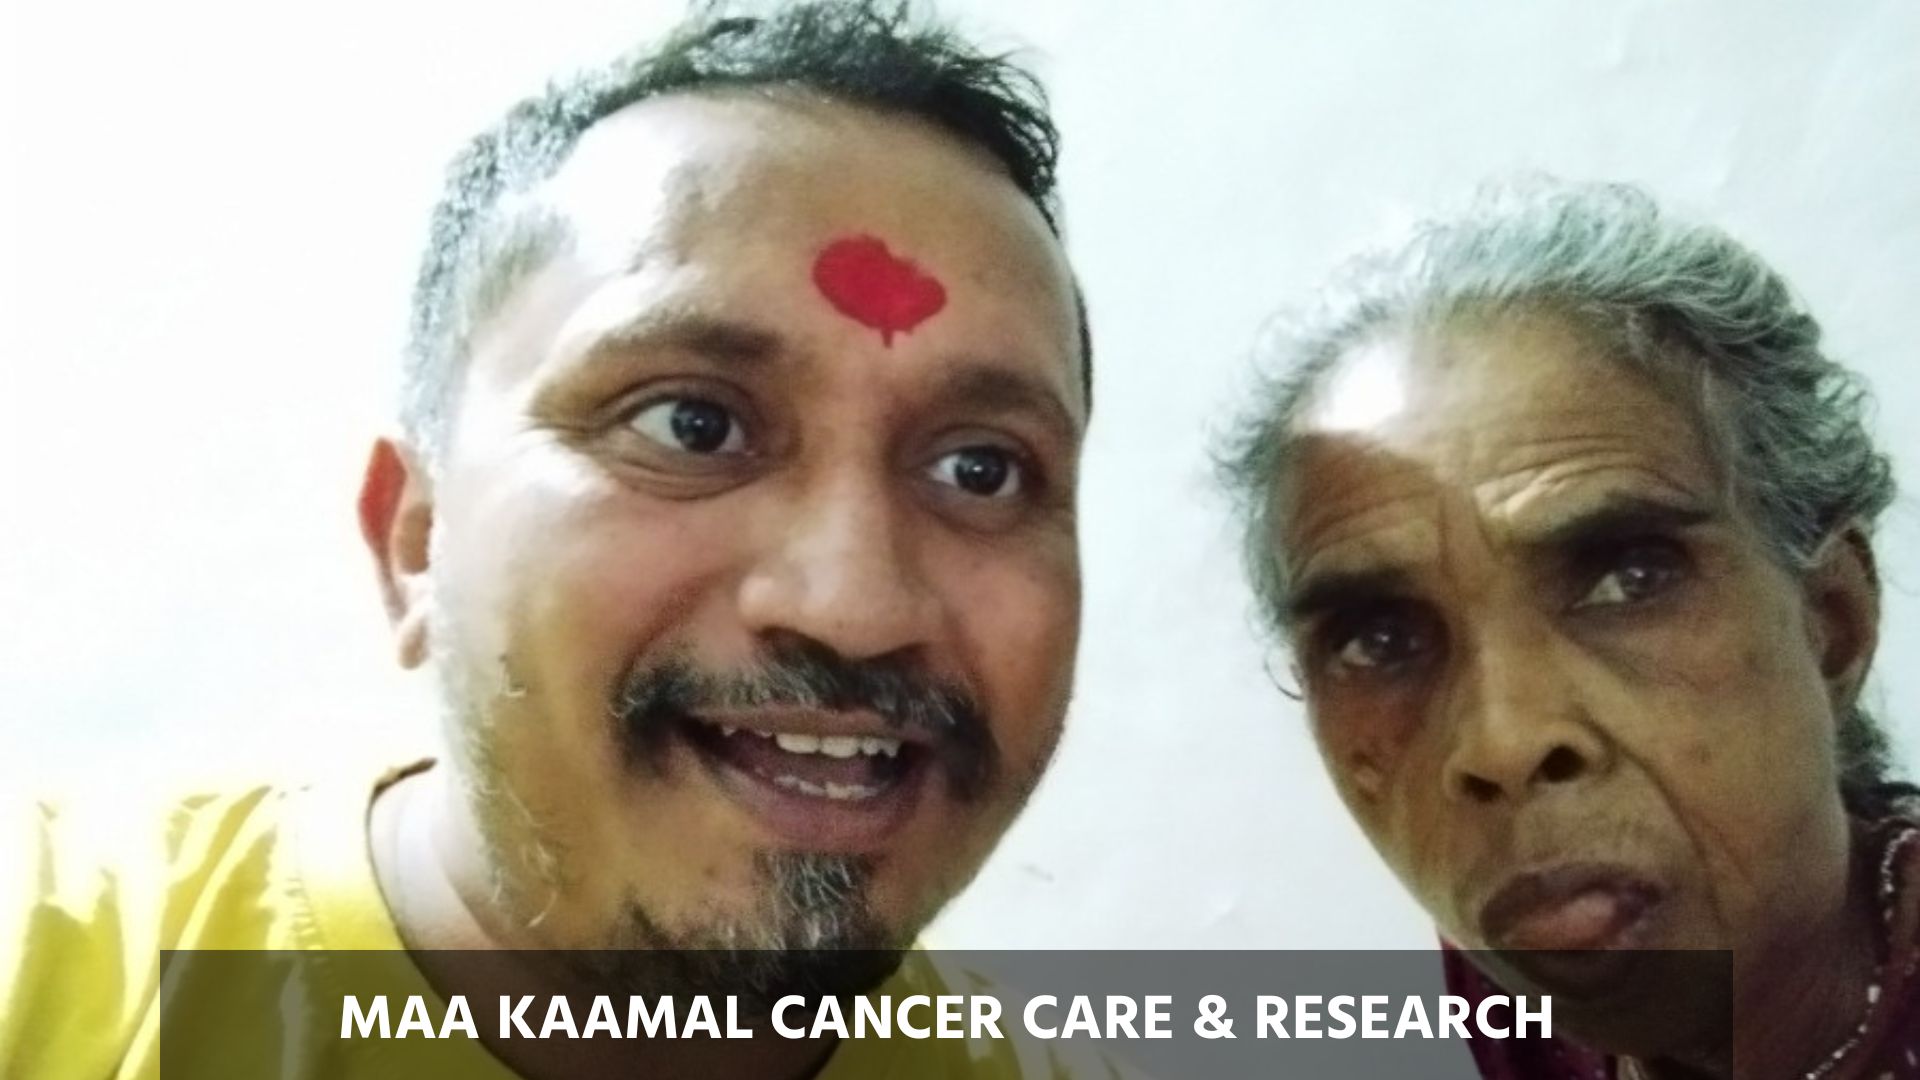 Maa Kaamal Cancer Care & Research